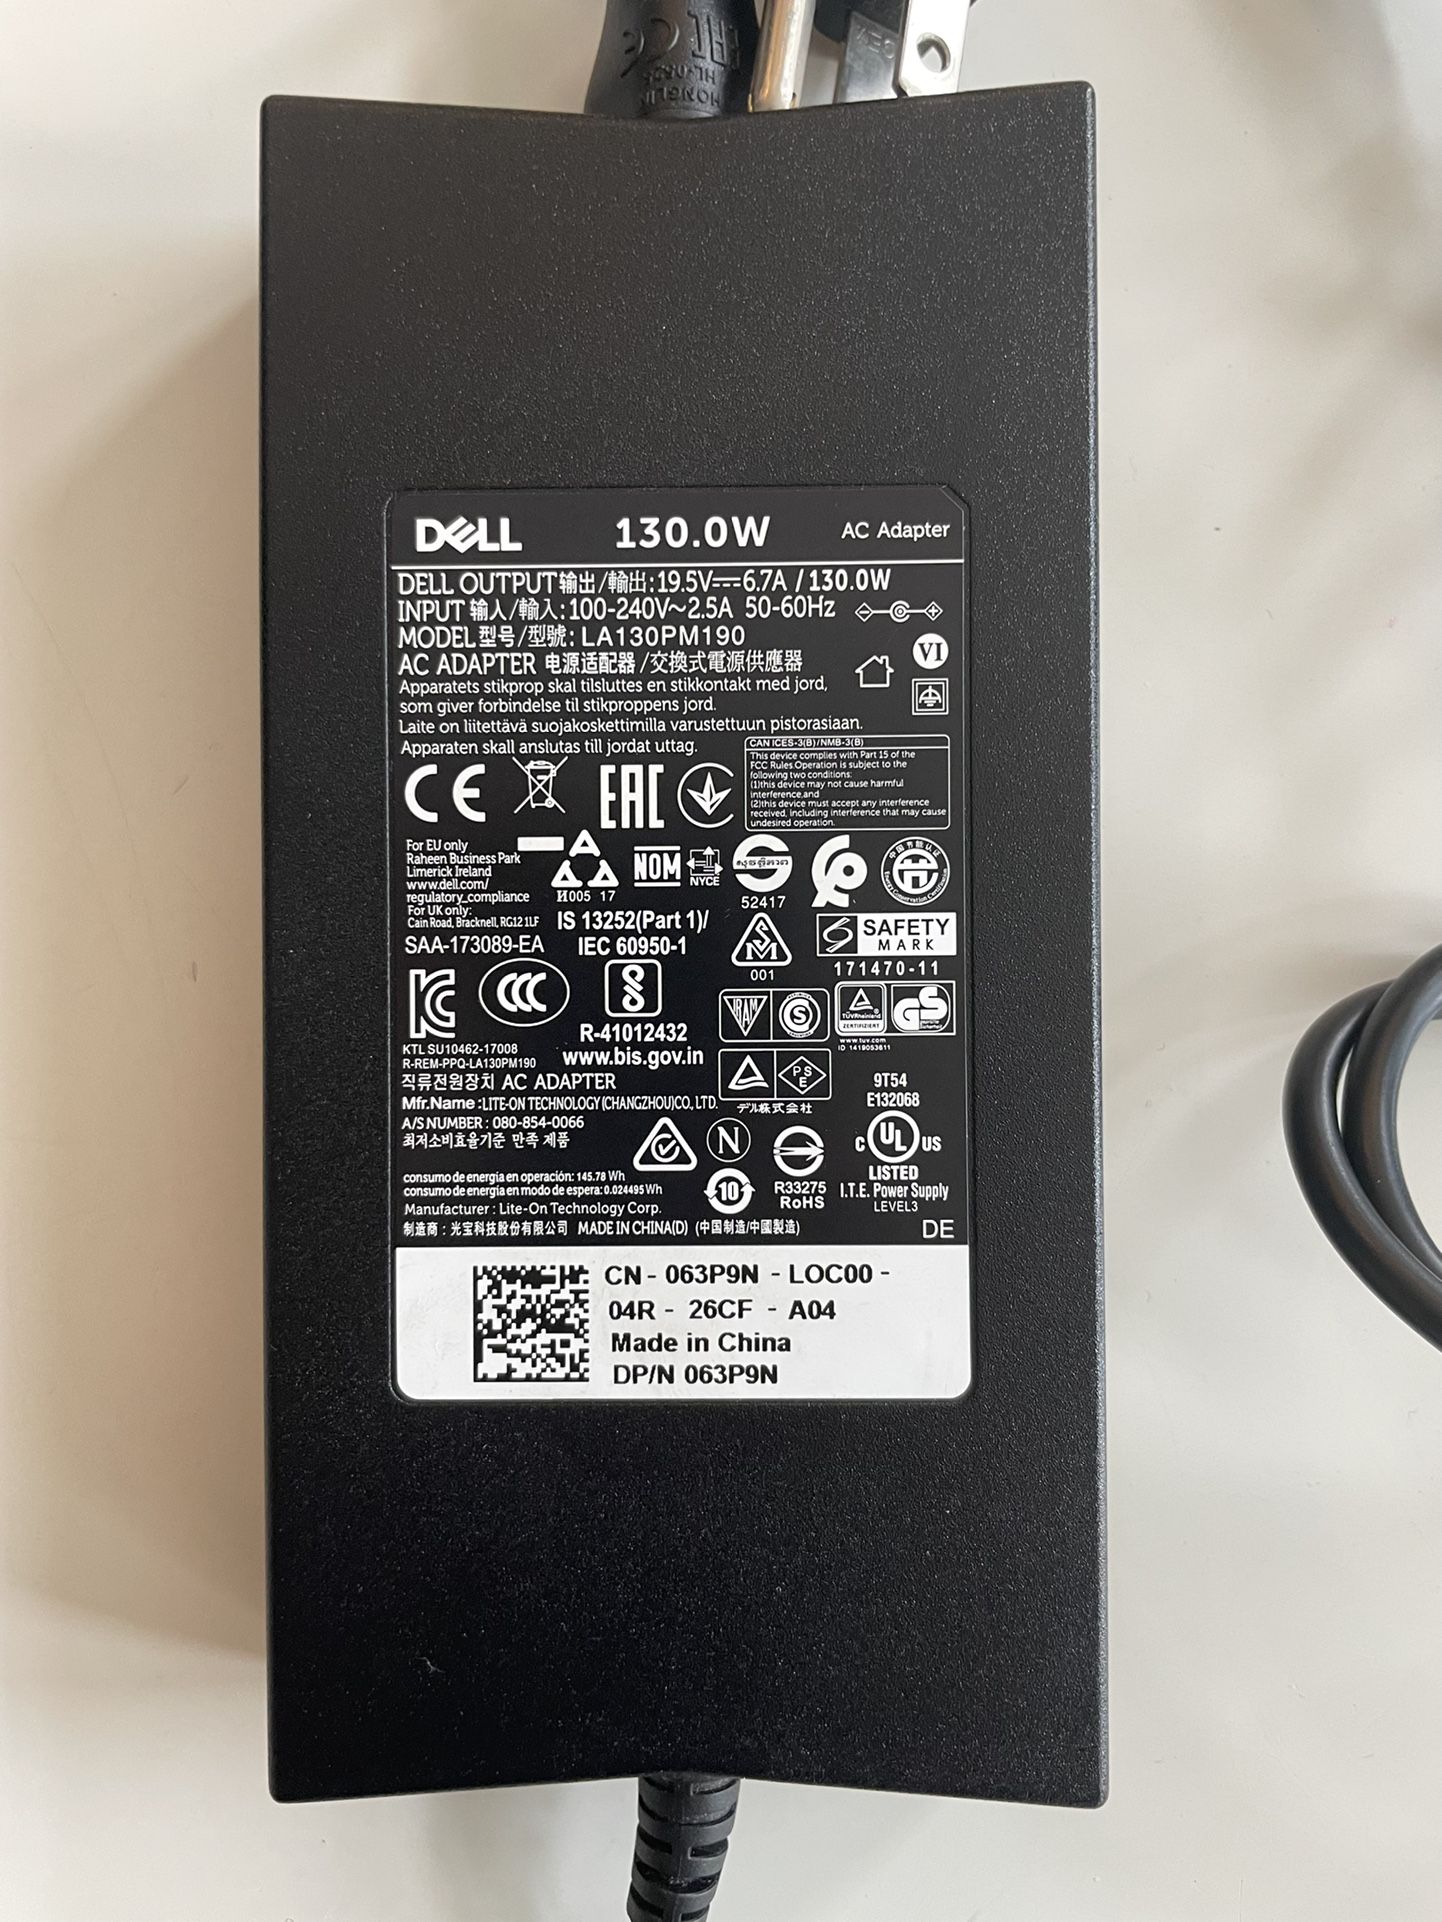 Dell Laptop 130.0W AC Adapter